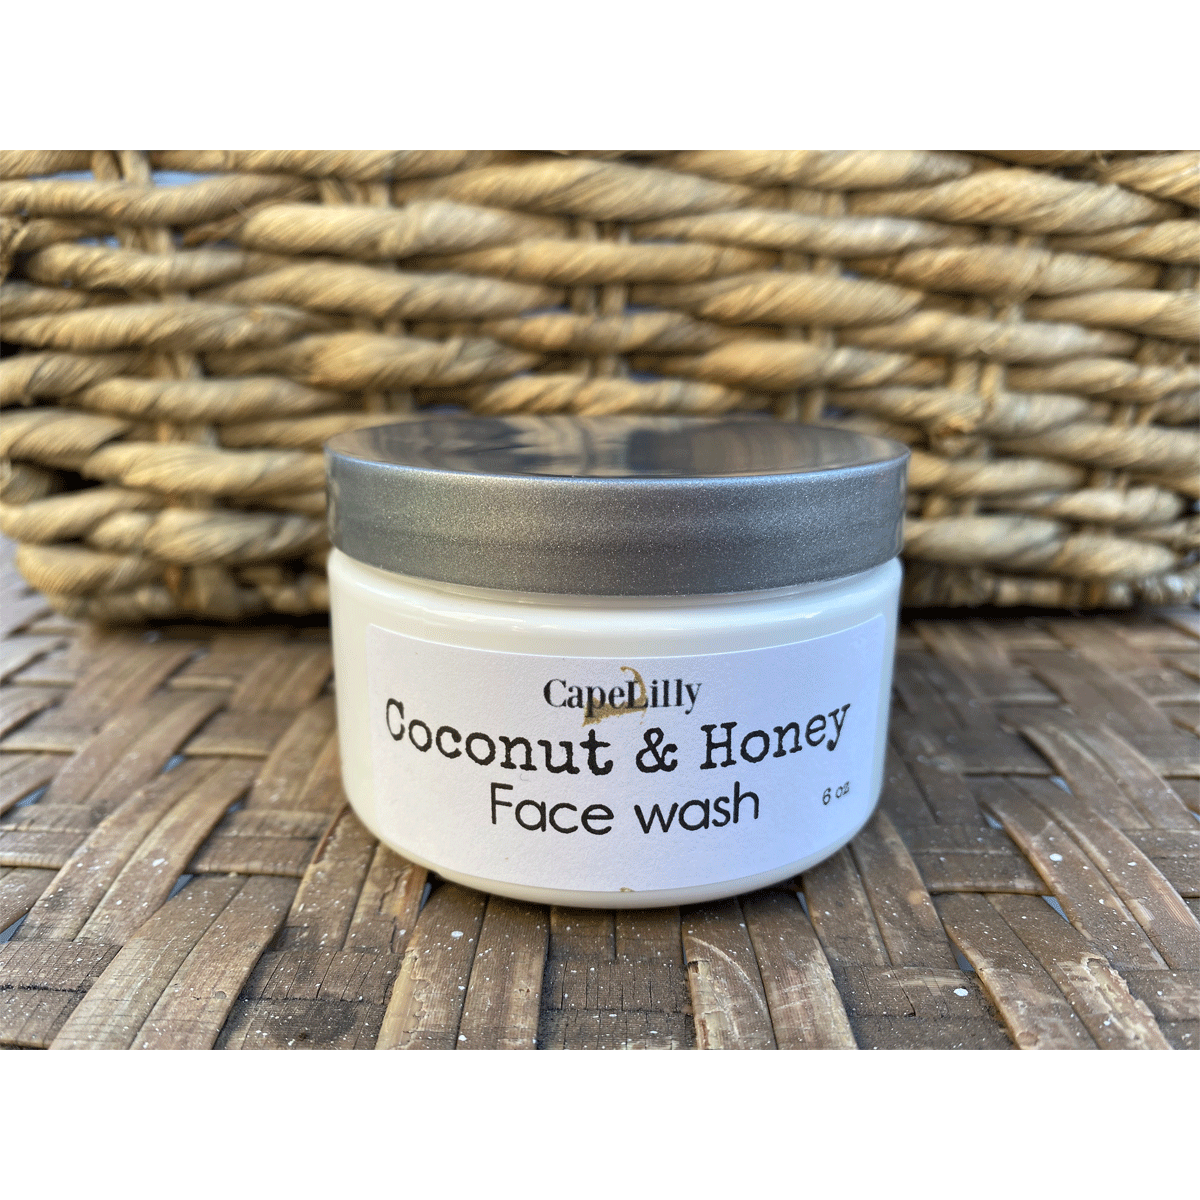 Coconut and Honey Face wash, Out of stock.